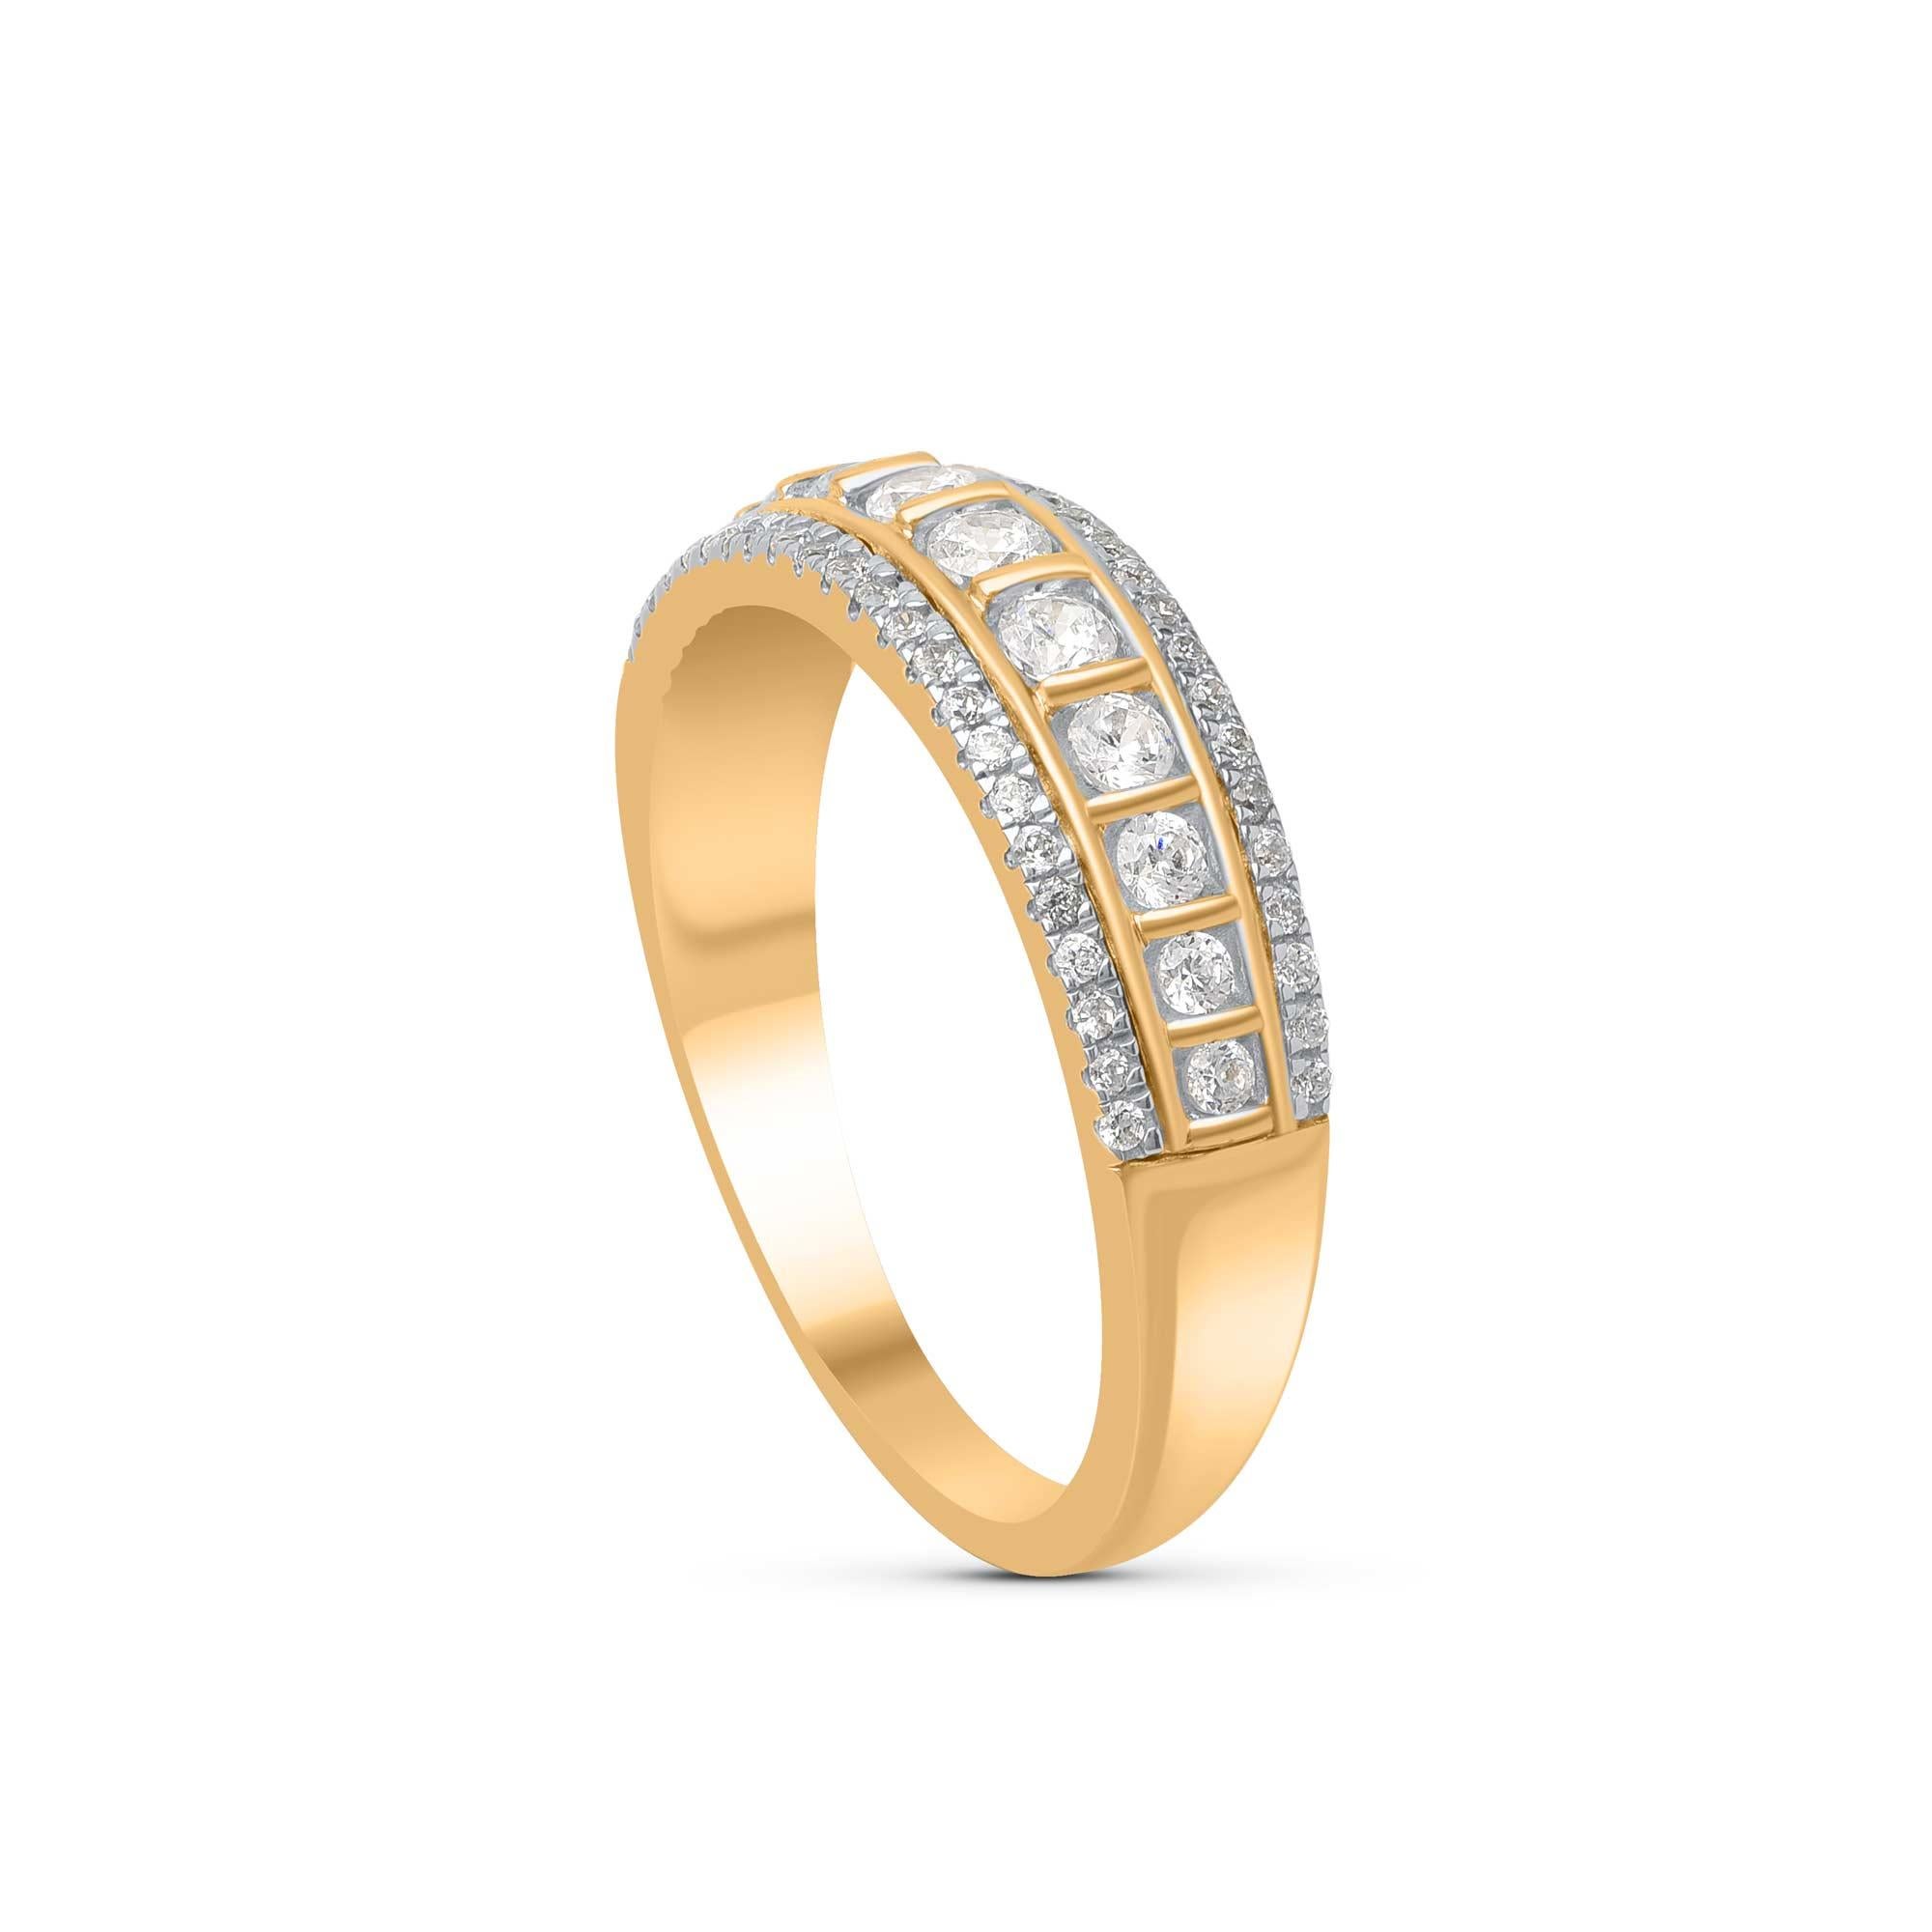 Dazzles with 57 brilliant natural diamonds beautifully set in nick and prong setting and designed by our in house experts in 18 KT yellow gold. Diamonds are graded H-I Color, I2 Clarity.  

Metal color and ring size can be customized on request.